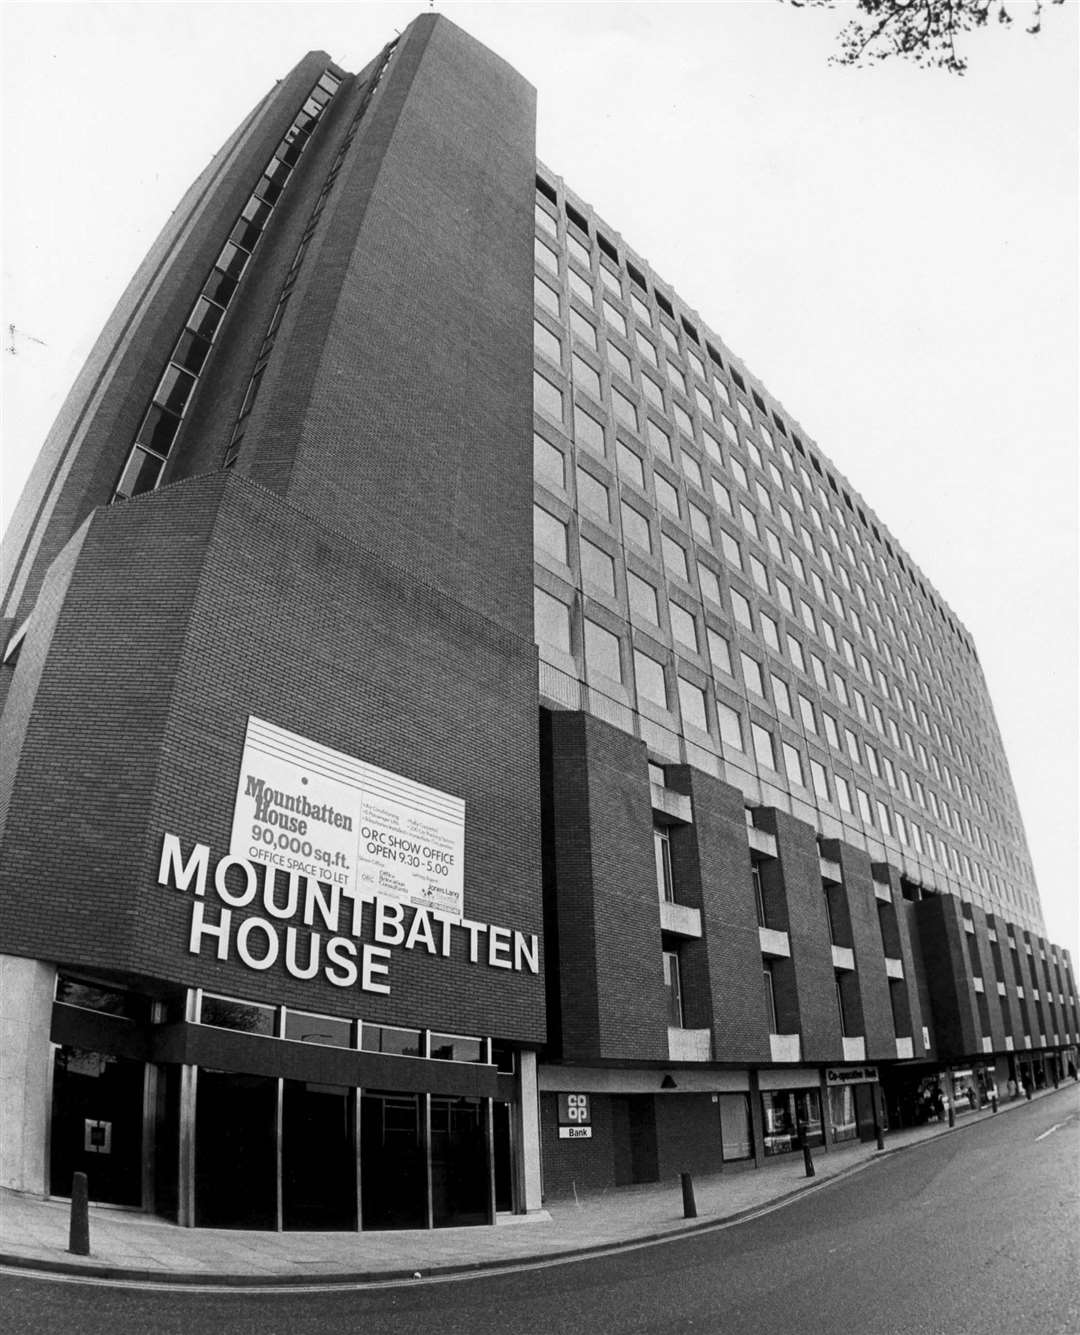 Mountbatten House, Chatham, in 1982. The 1970s office block was recently purchased by Medway Council, with plans approved for 164 apartments and a rooftop champagne bar at the site